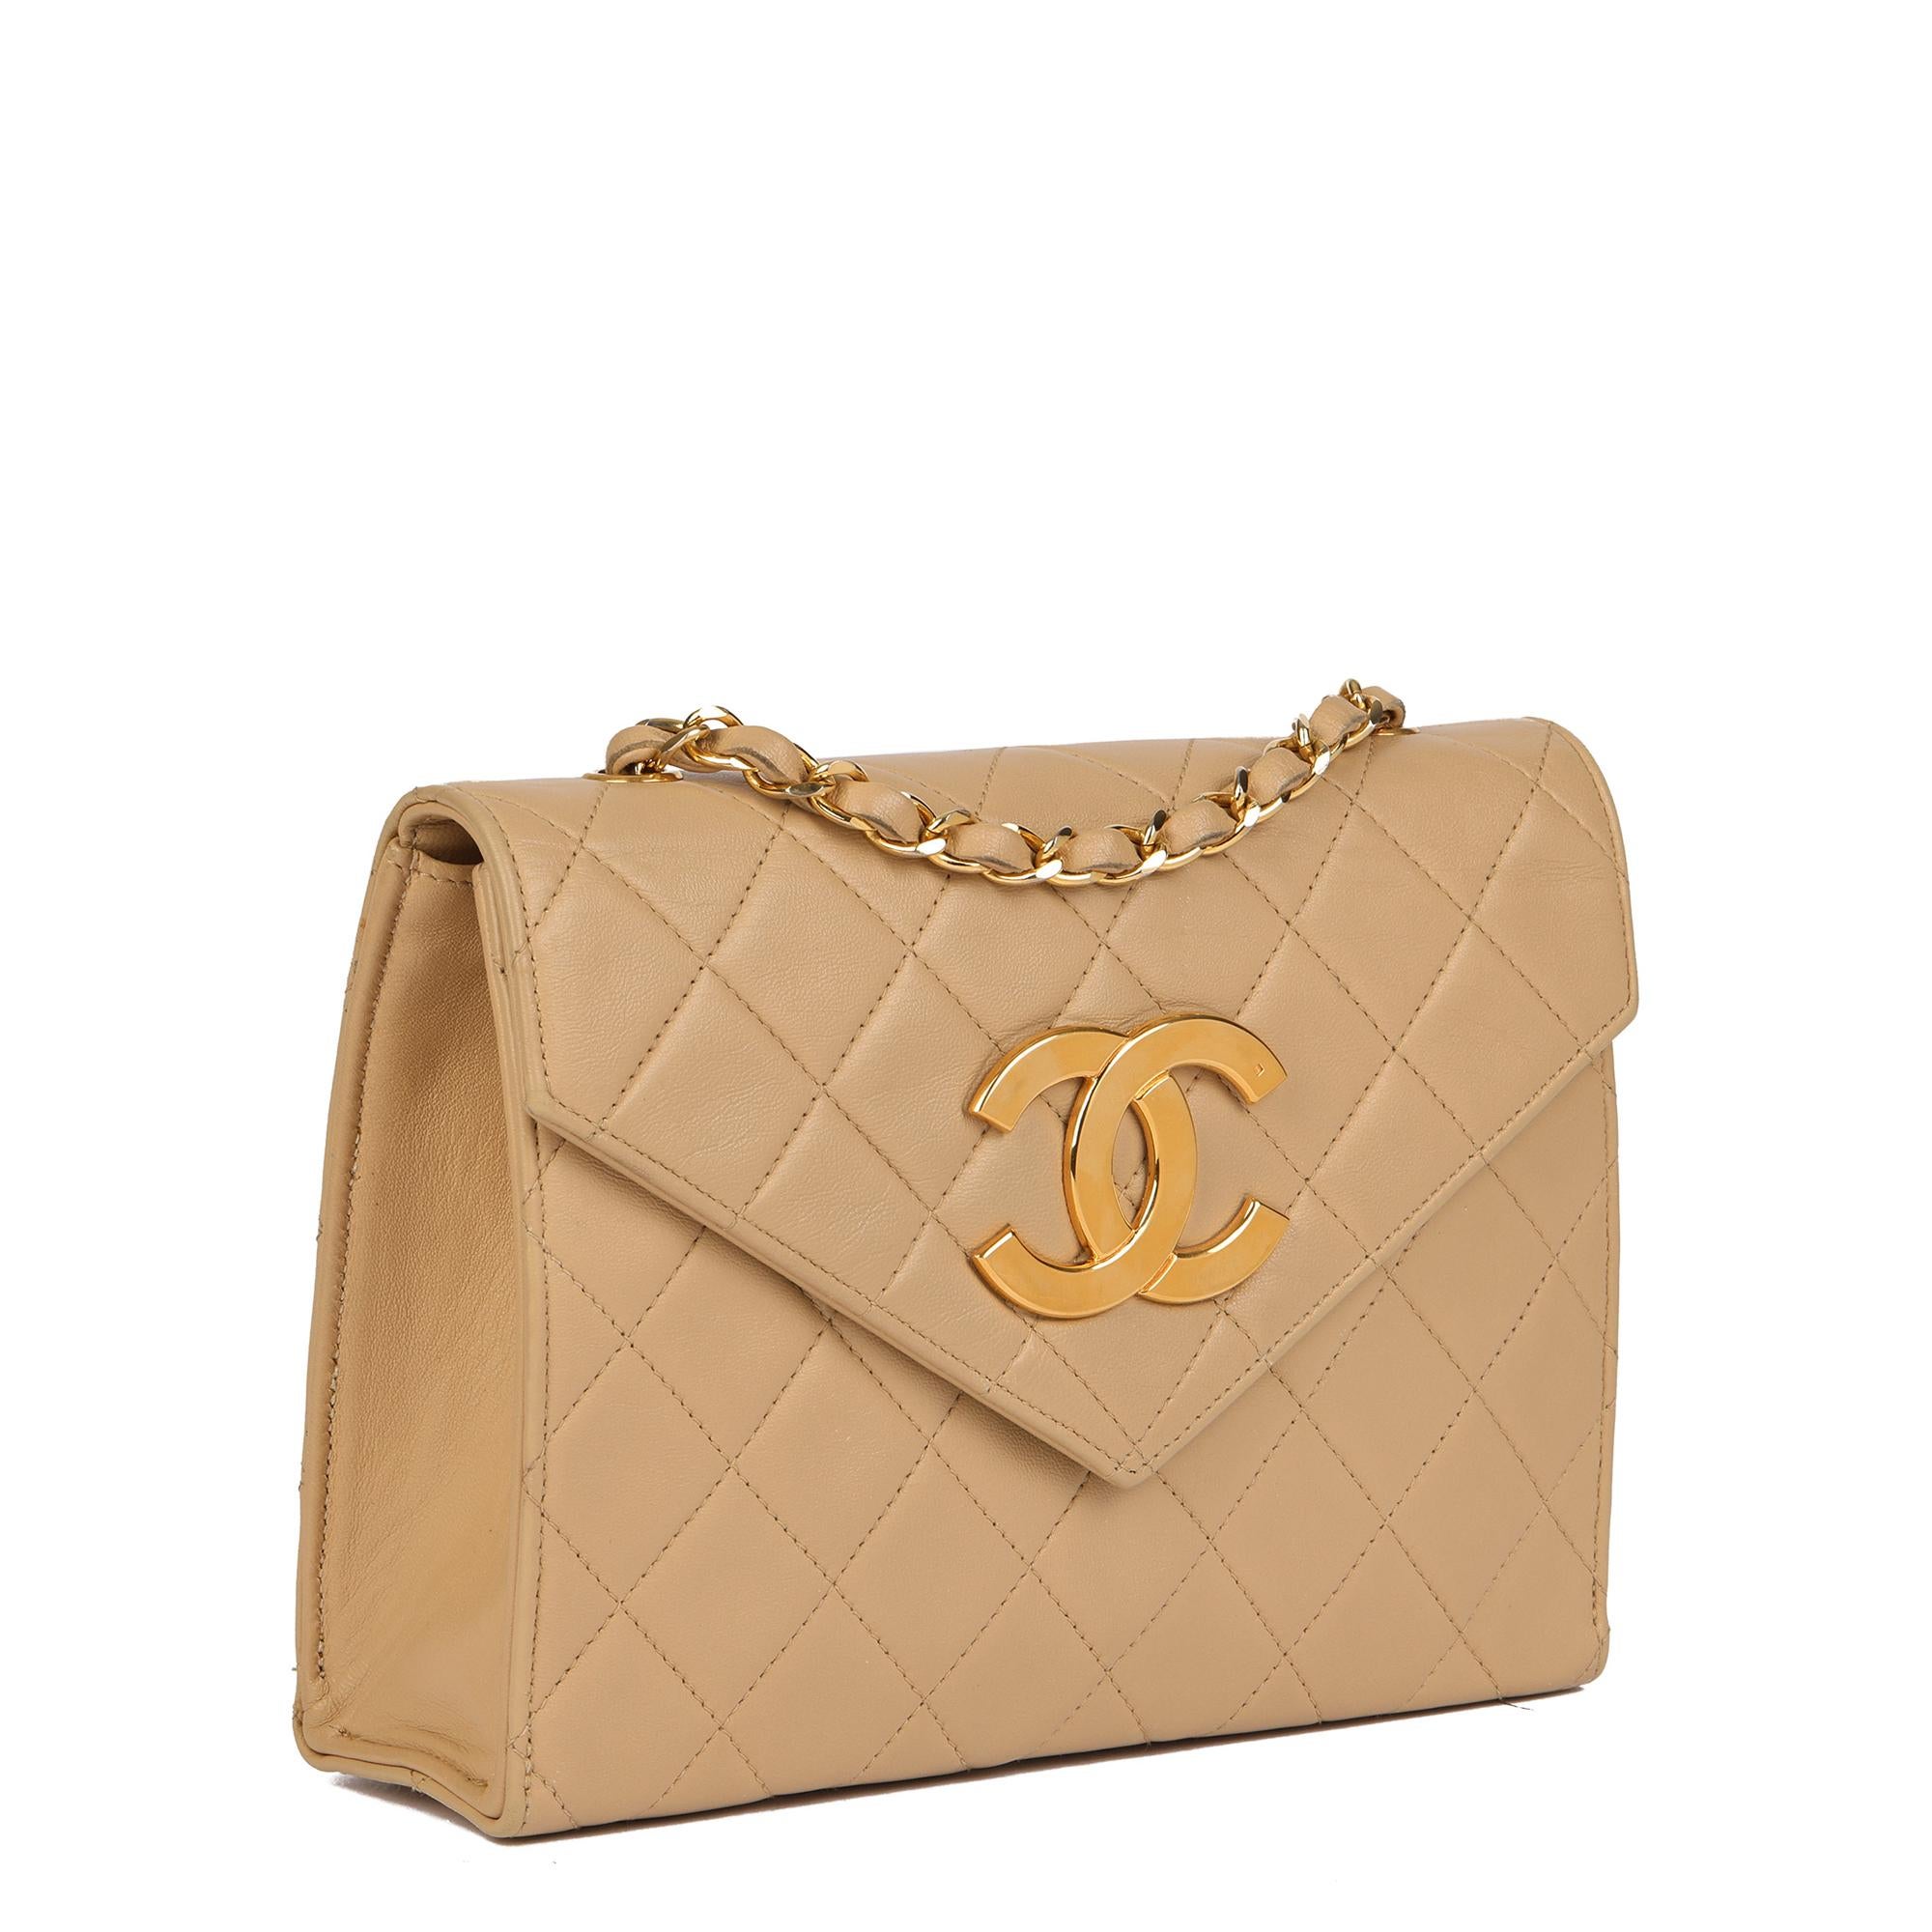 CHANEL
Beige Quilted Lambskin Vintage Mini Classic Single Flap Bag

Serial Number: 1059714
Age (Circa): 1989
Accompanied By: Chanel Dust Bag, Authenticity Card
Authenticity Details: Authenticity Card, Serial Sticker (Made in France)
Gender: